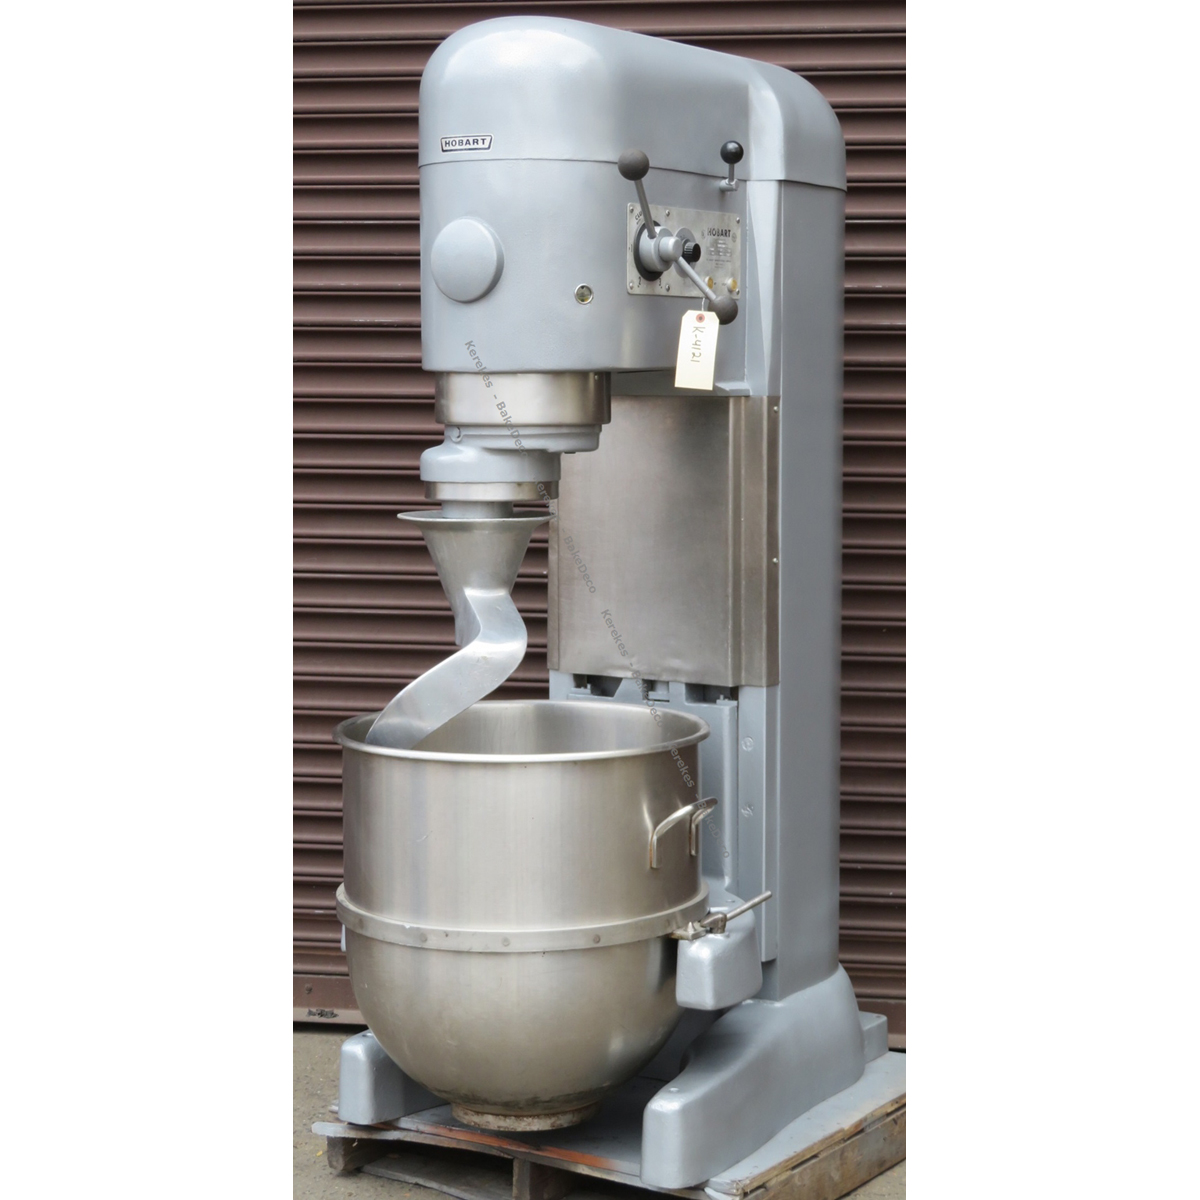 Hobart 140 Quart V1401 Mixer with Bowl, Used Excellent Condition